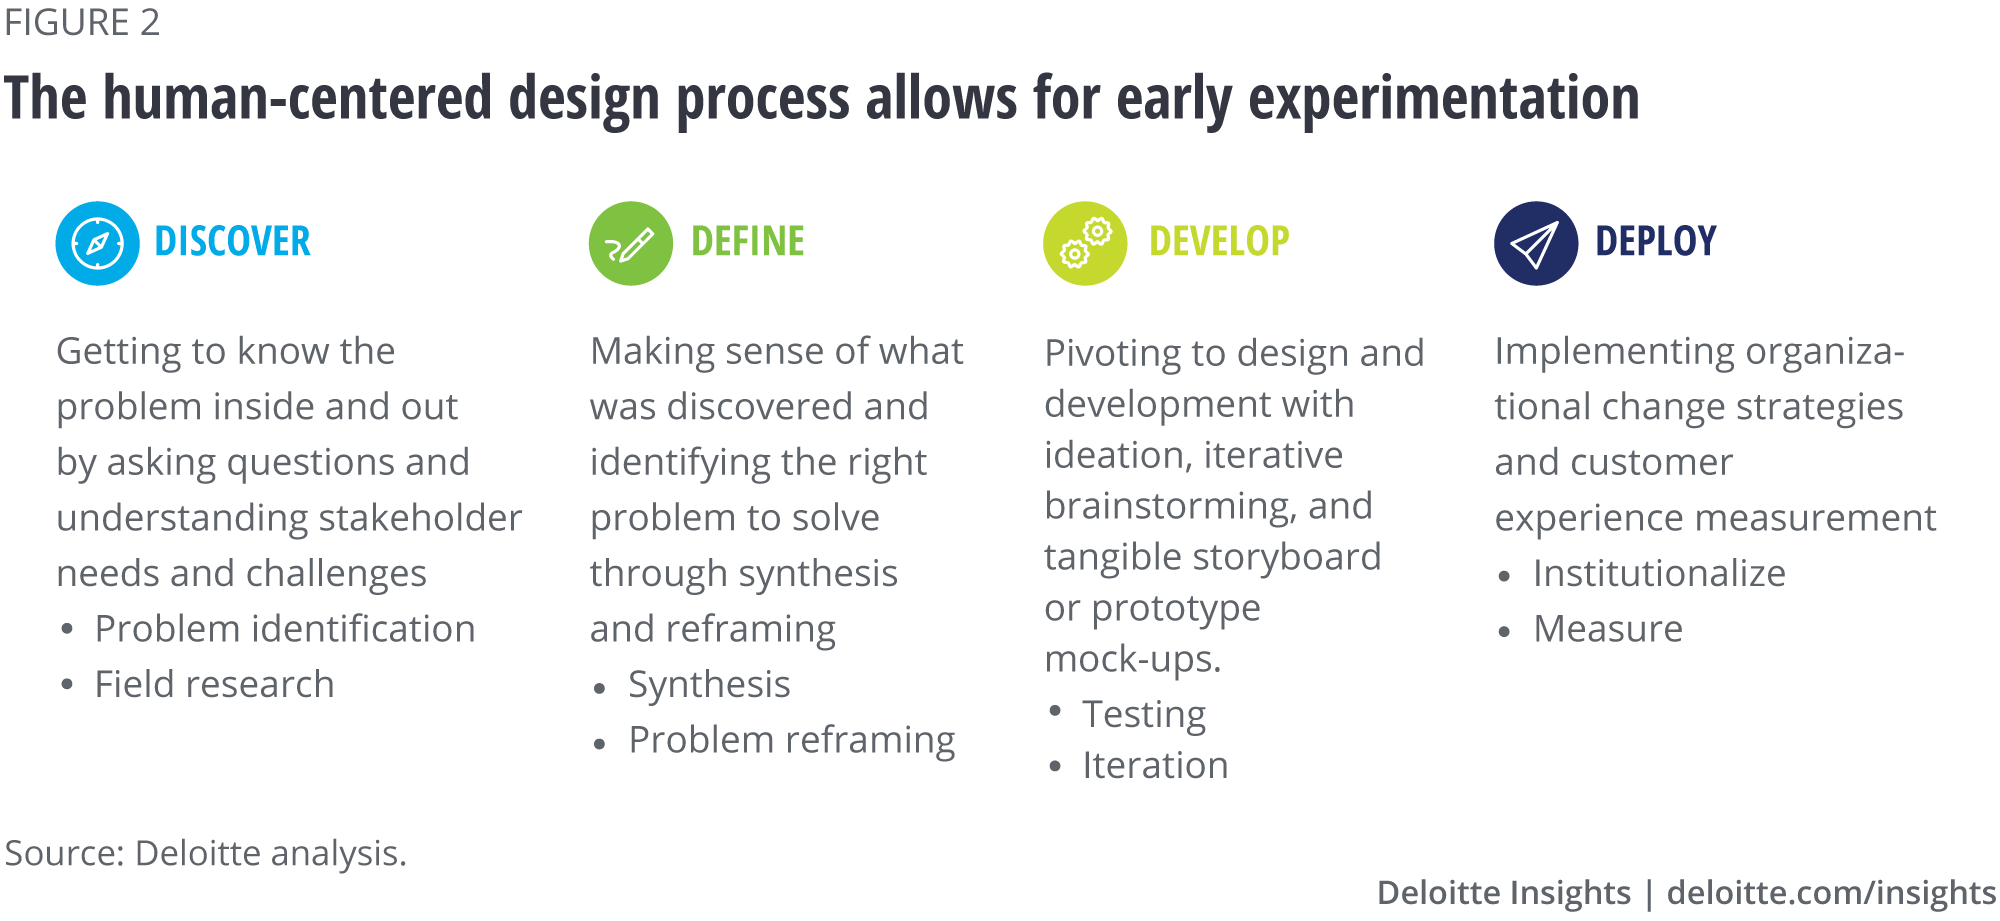 The human-centered design process allows for early experimentation